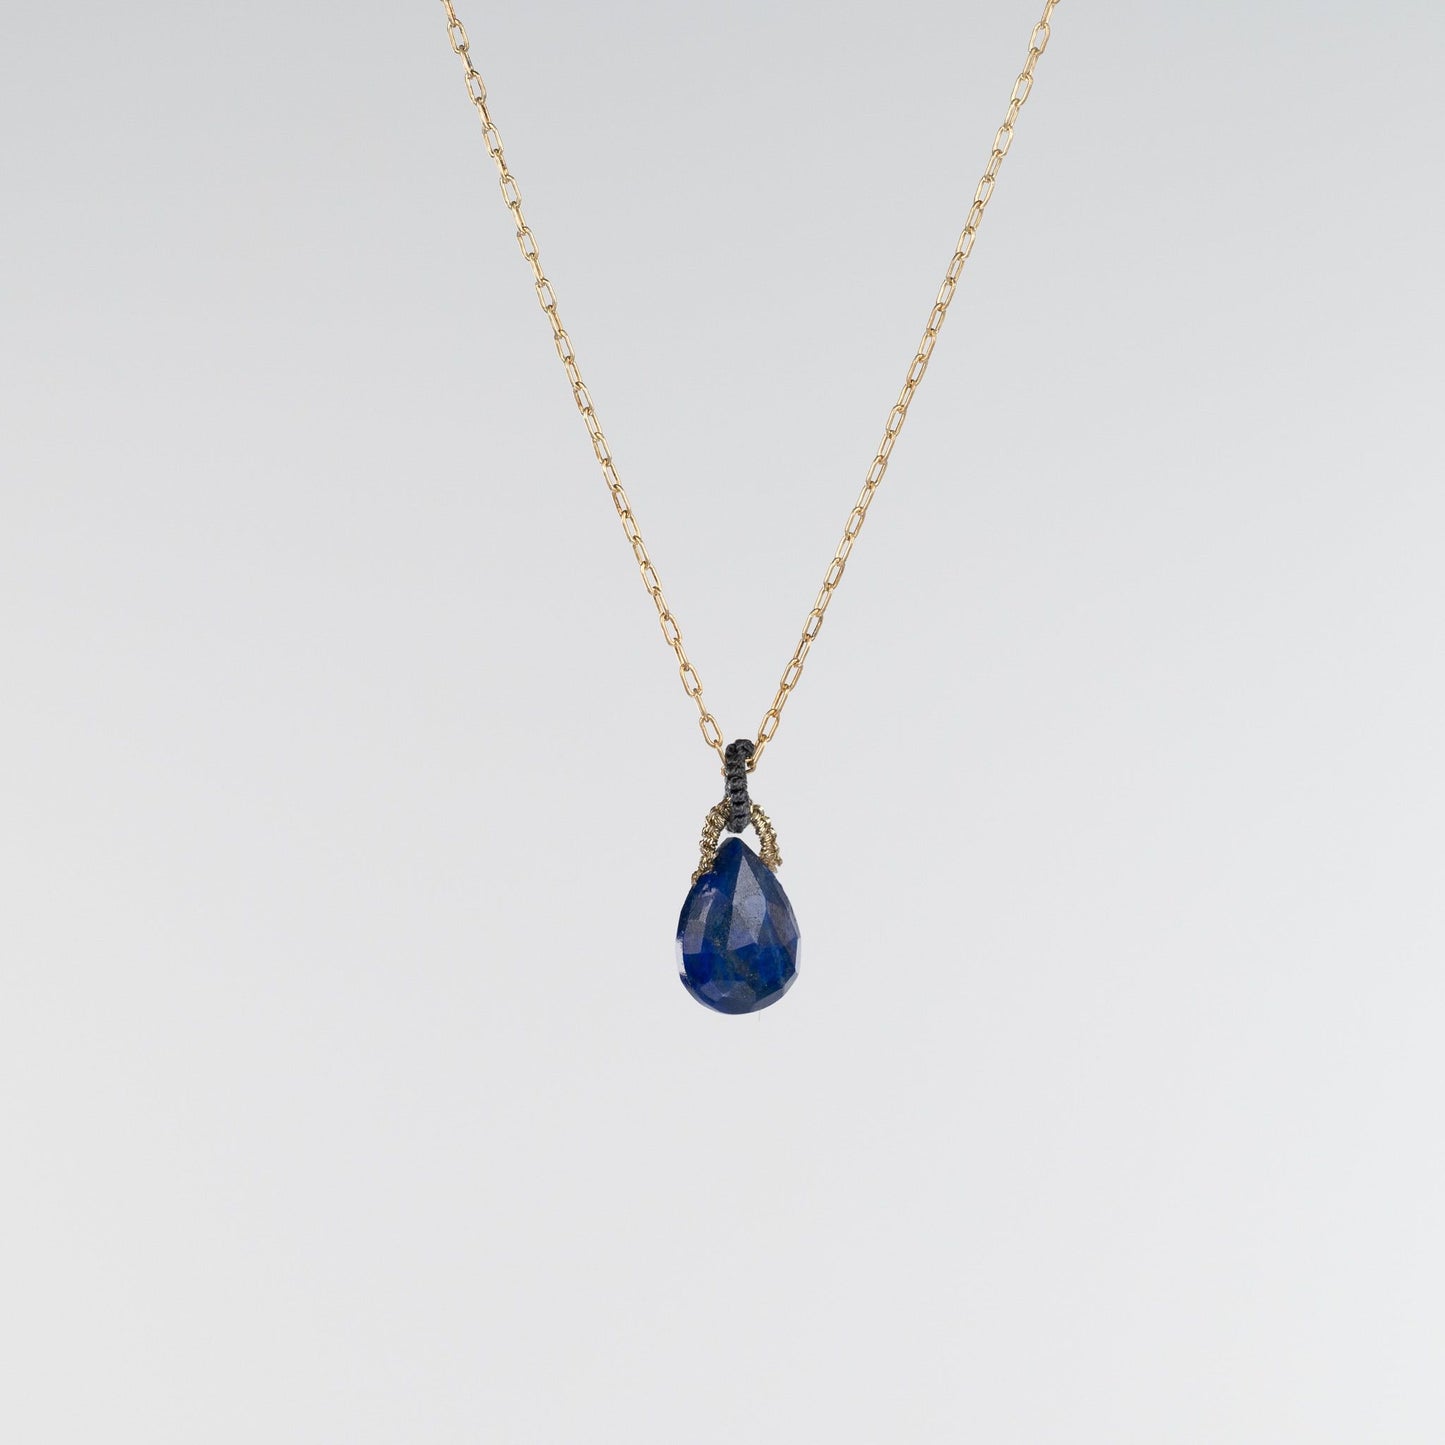 Load image into Gallery viewer, Danielle Welmond Sapphire Drop Necklace with Coordinating Grey Silk Cord
